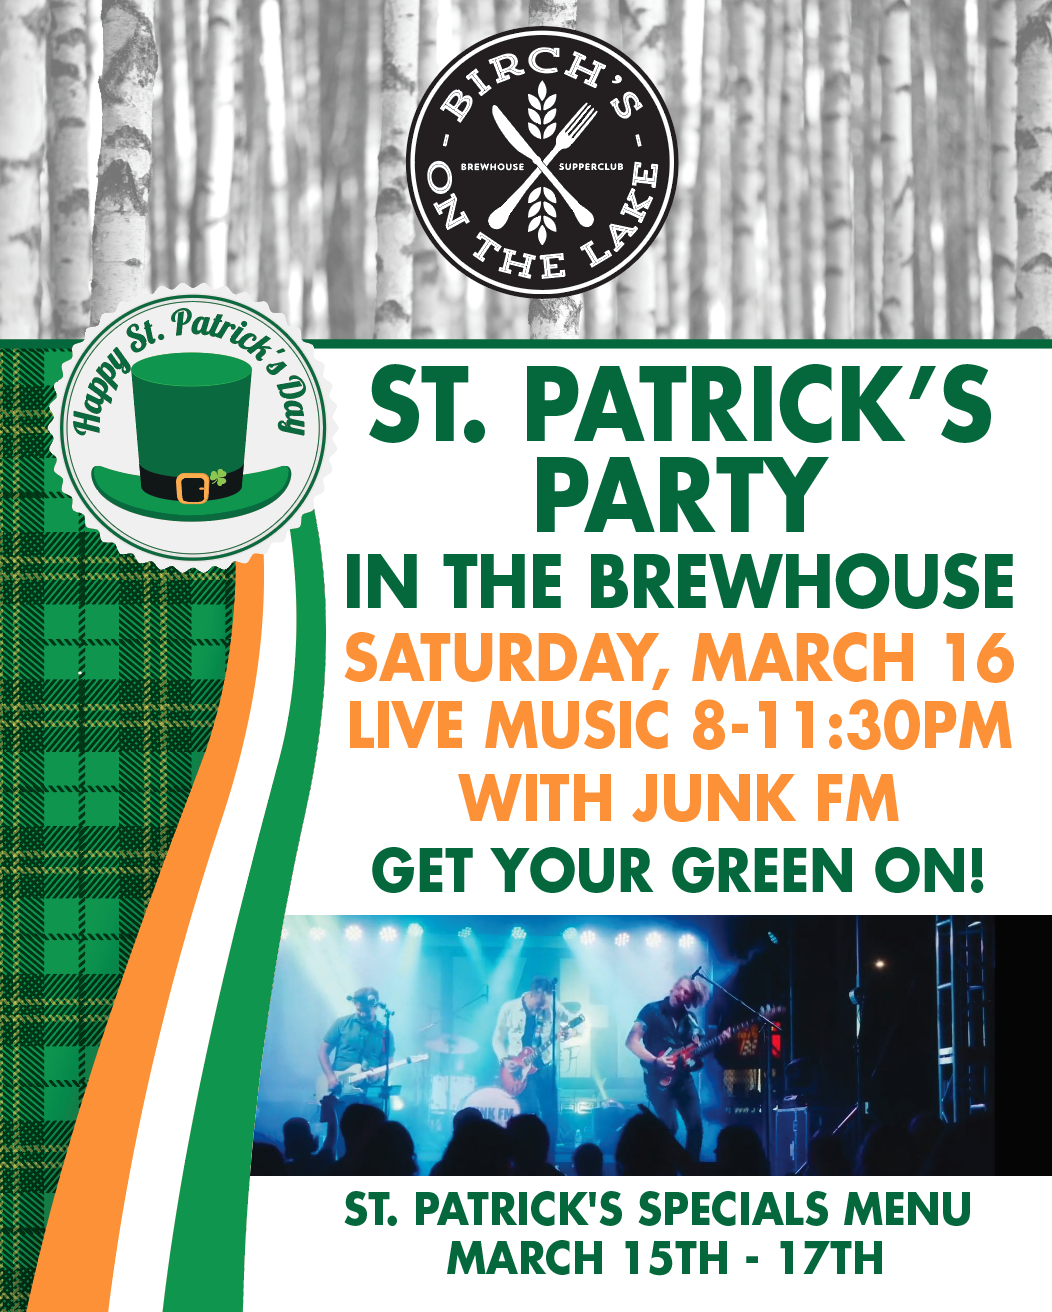 St. Patrick's Party in the brewhouse. Saturday March 16. Live Music 8-11:30 PM with Junk FM. GET YOUR GREEN ON!